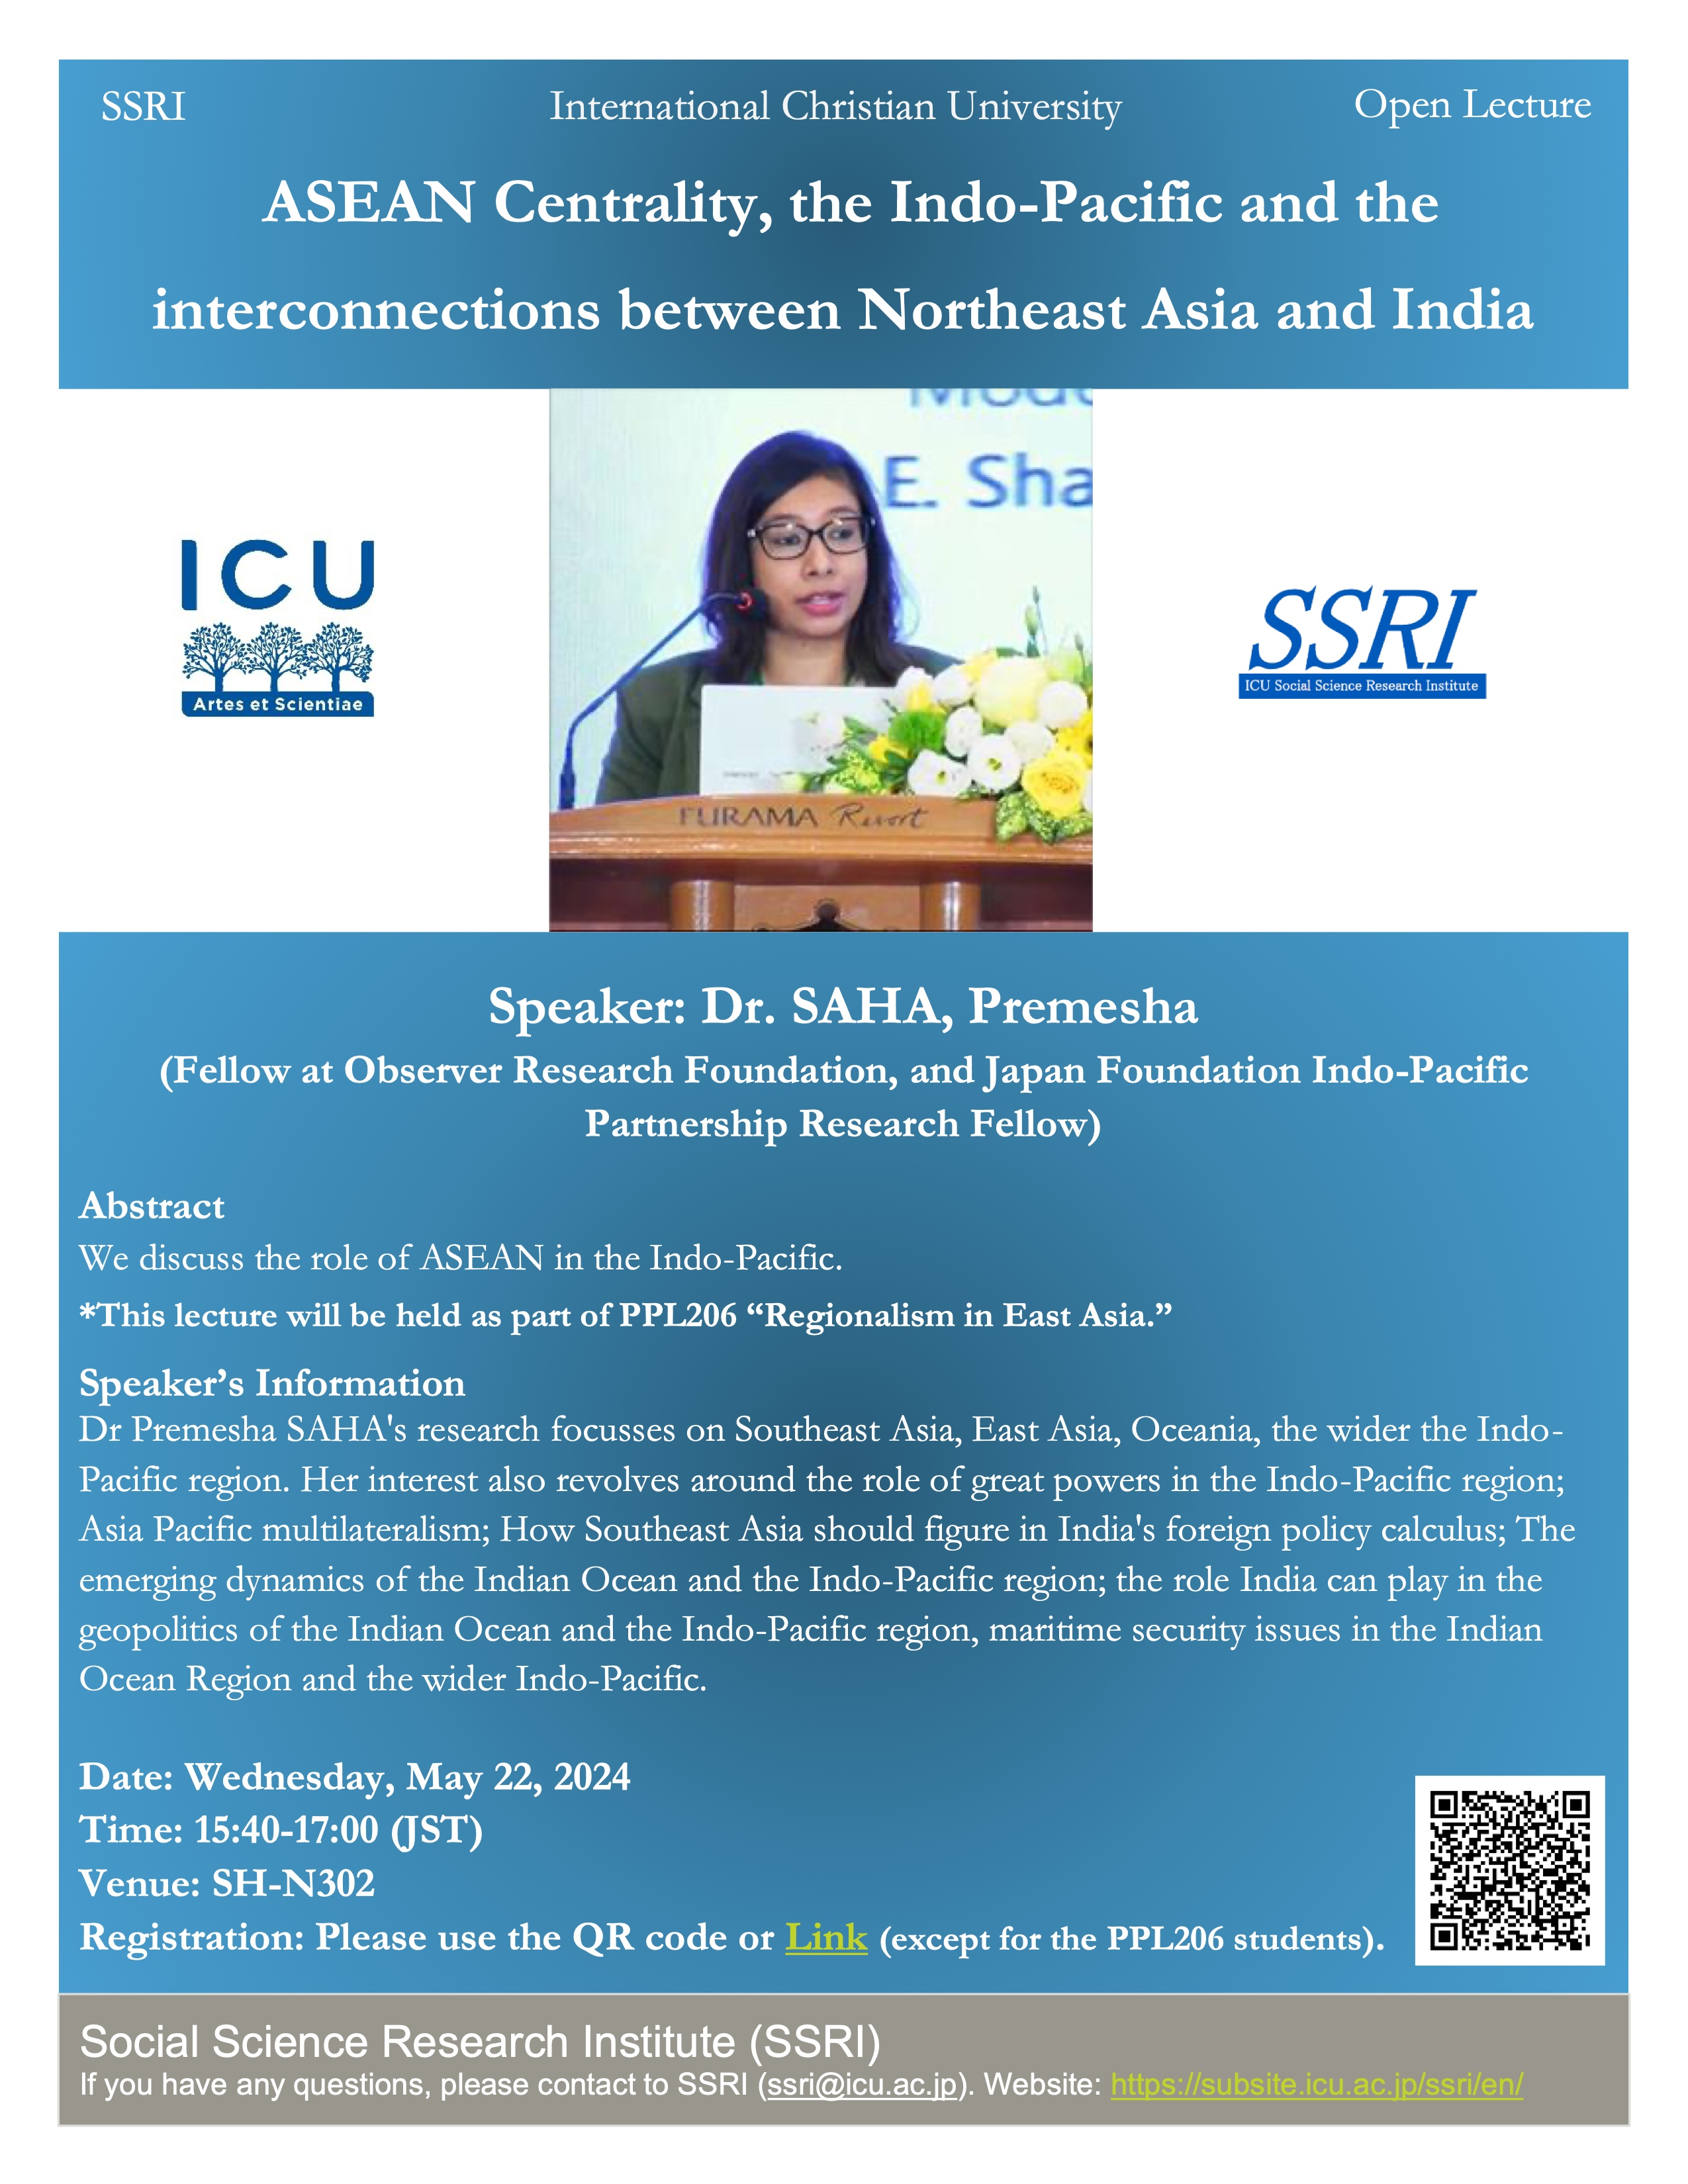 2024.5.22 OpenLecture_ASEAN Centrality, the Indo-Pacific and the interconnections between Northeast Asia and India (1).jpg